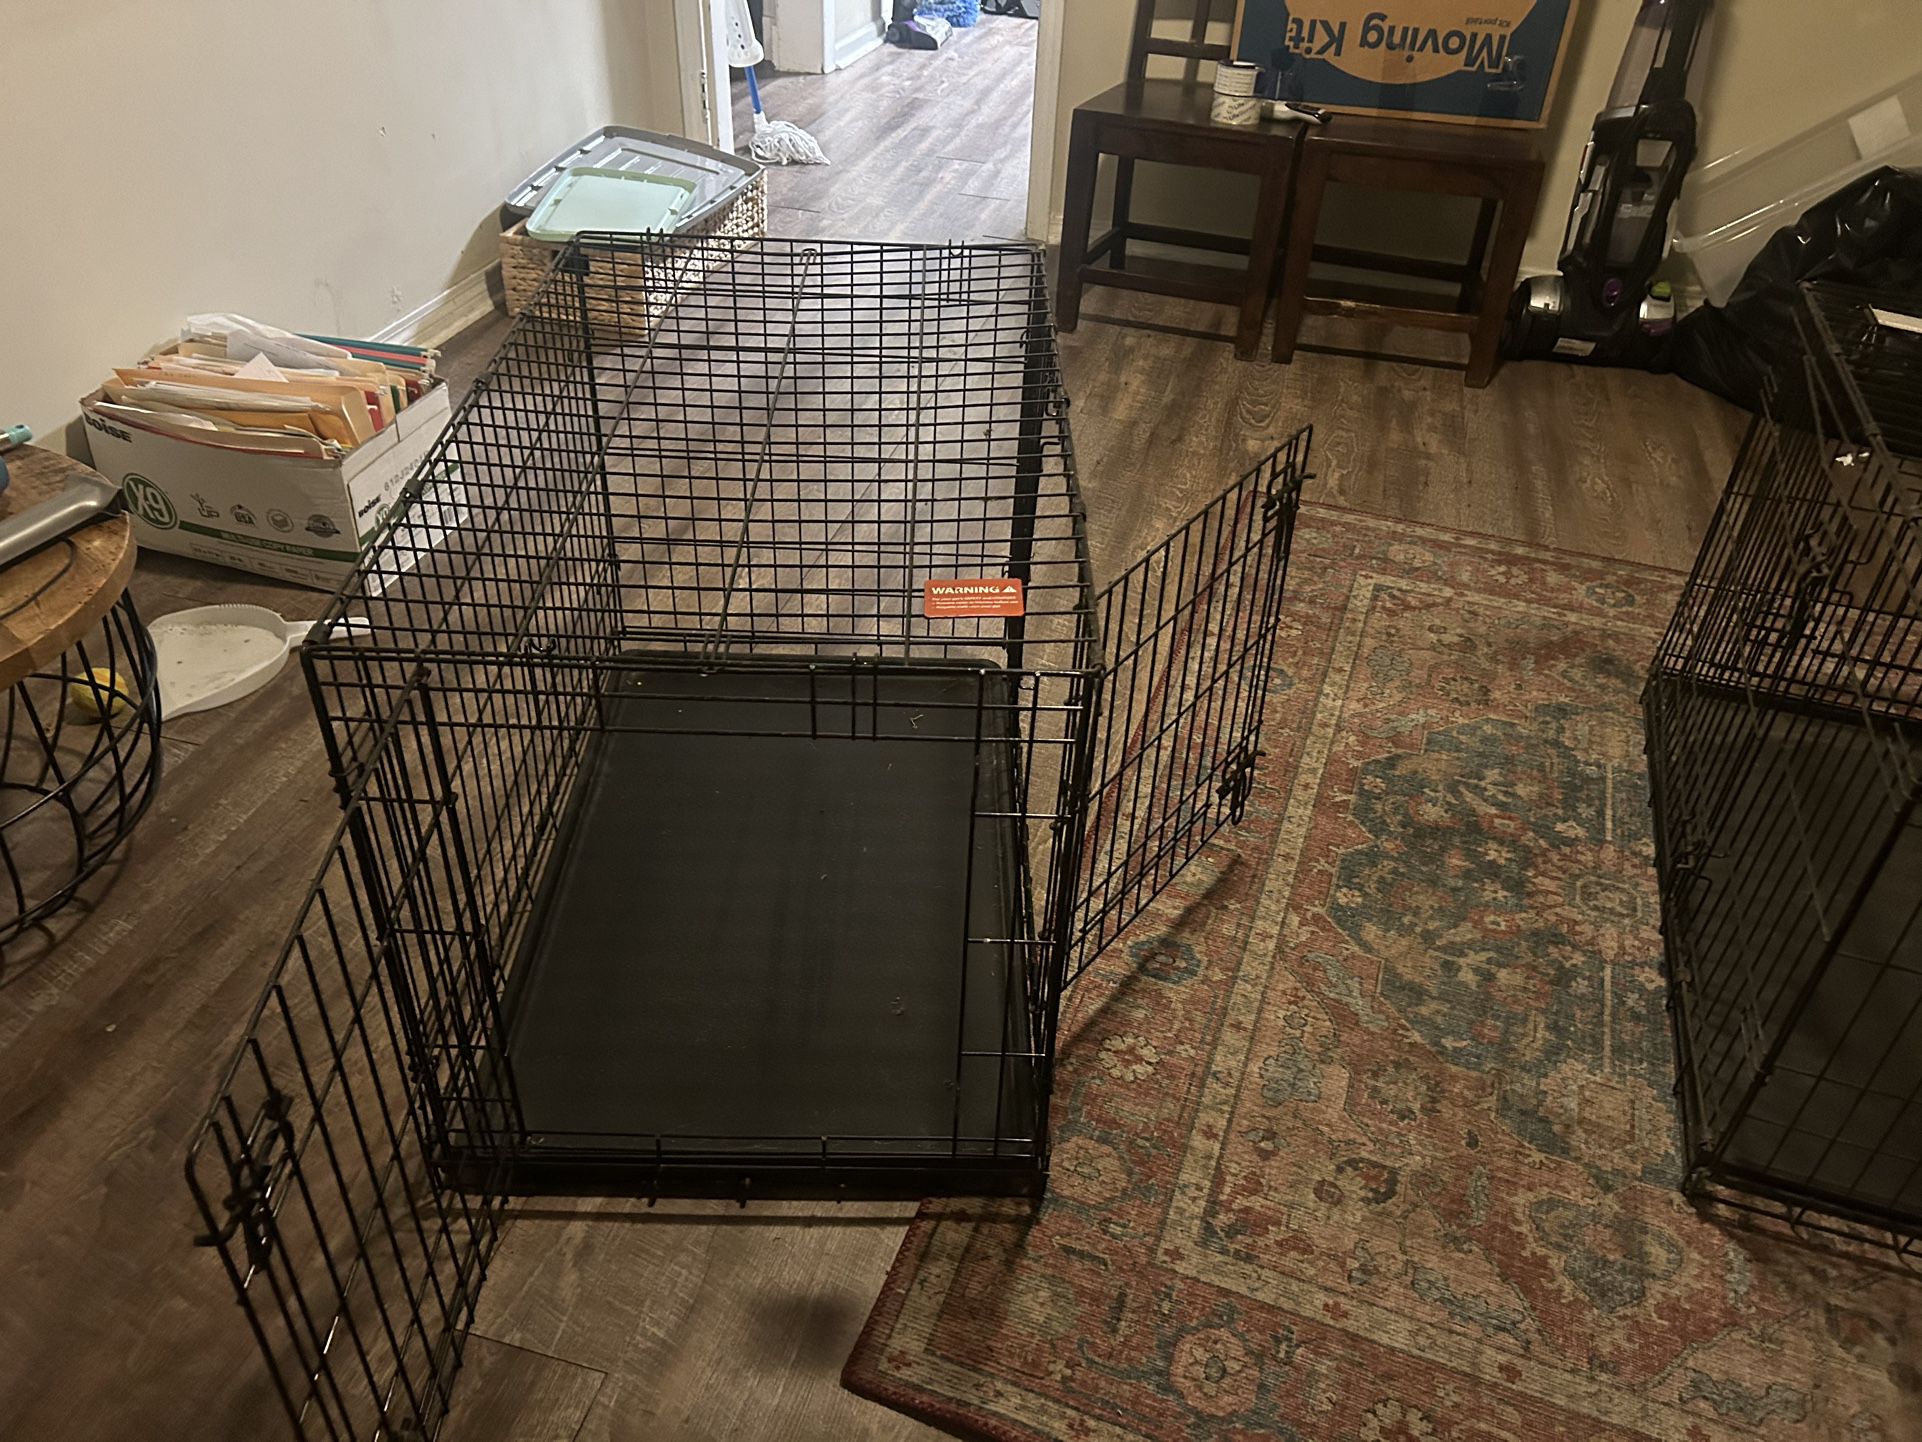 2 Dog Cages 35.5 X 22 